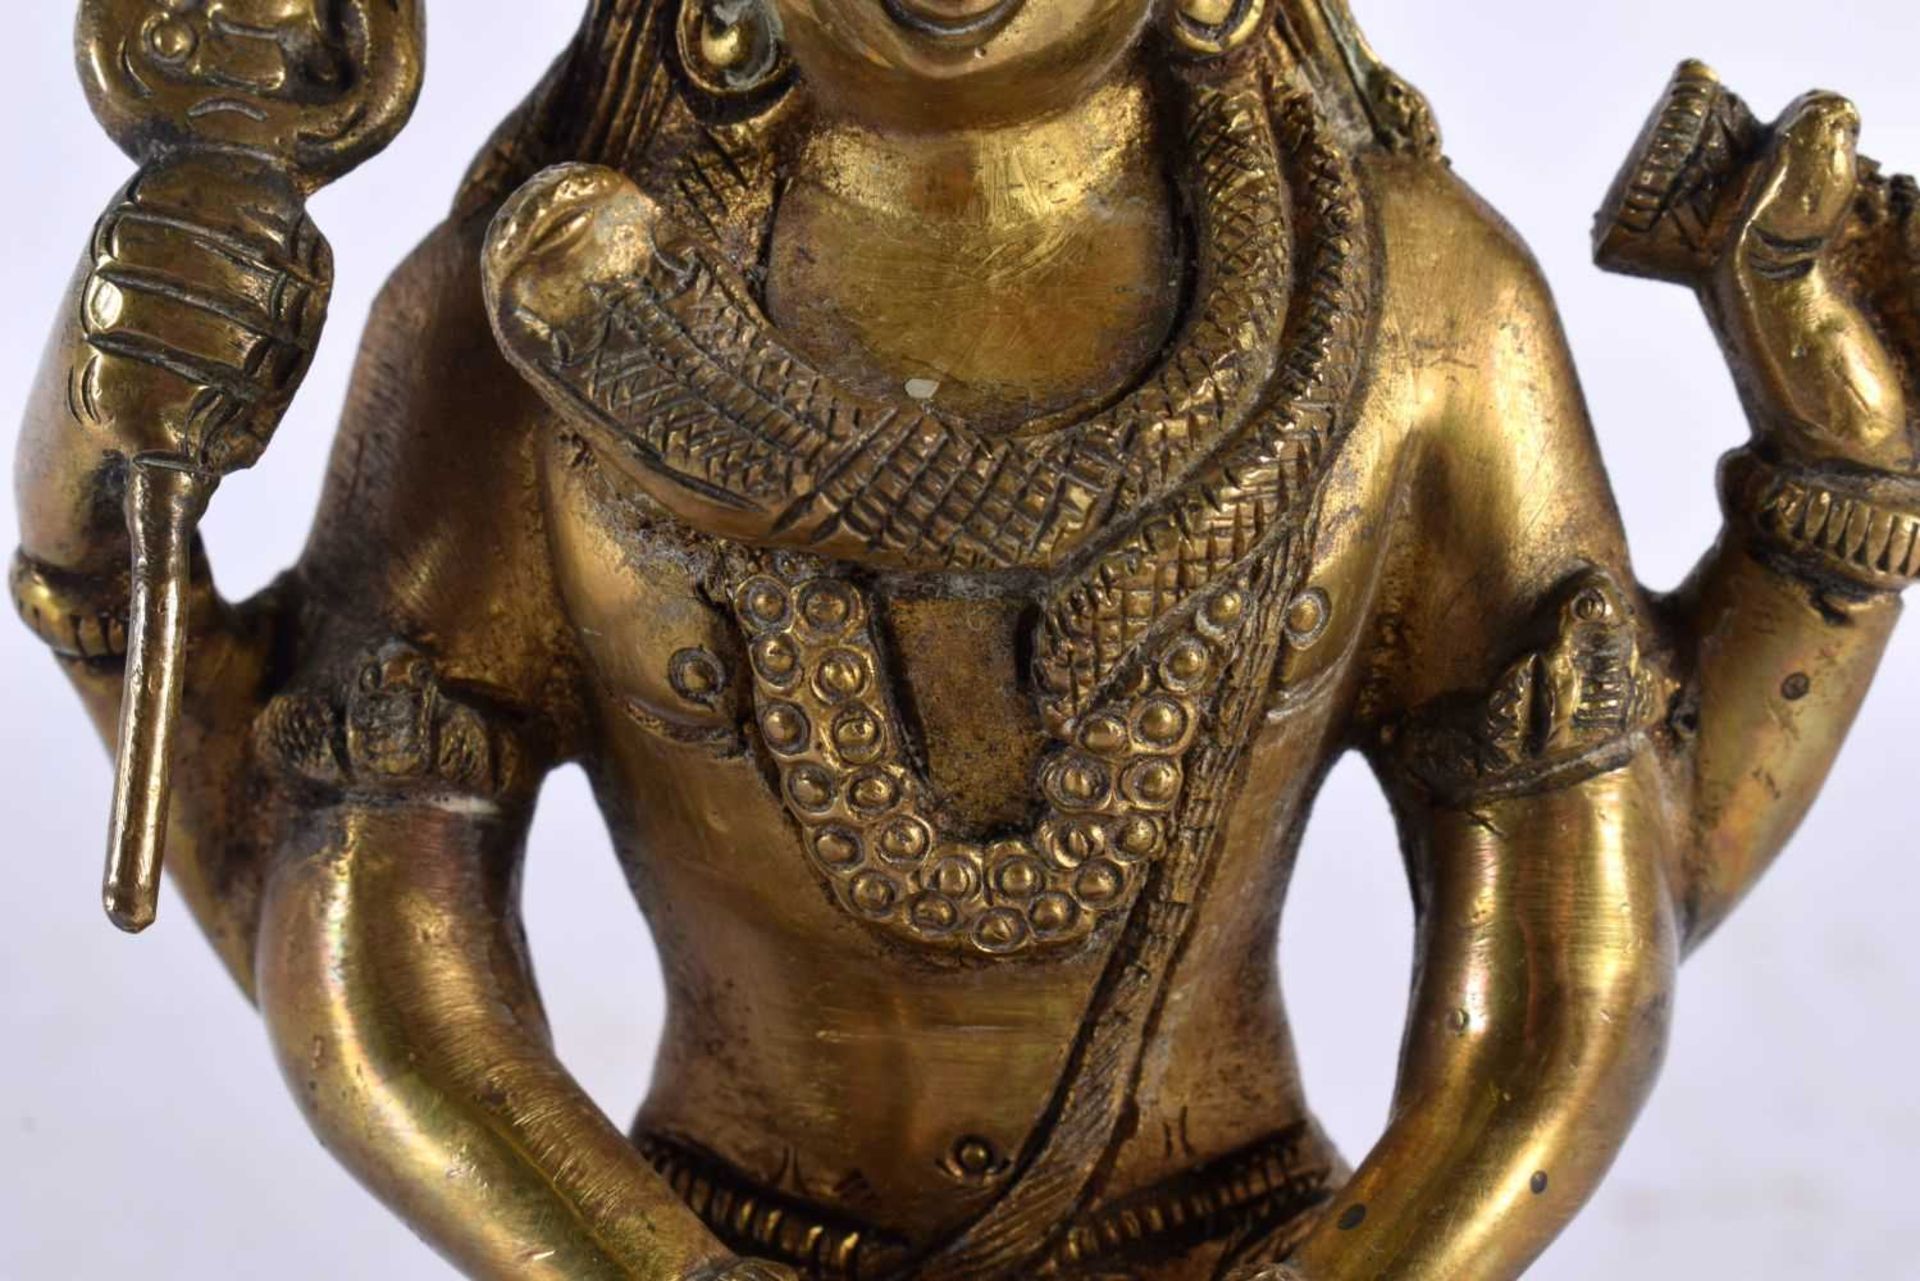 A 19TH CENTURY INDIAN BRONZE HINDU FIGURE OF SHIVA modelled seated on a lion skin with vasuki, - Image 3 of 8